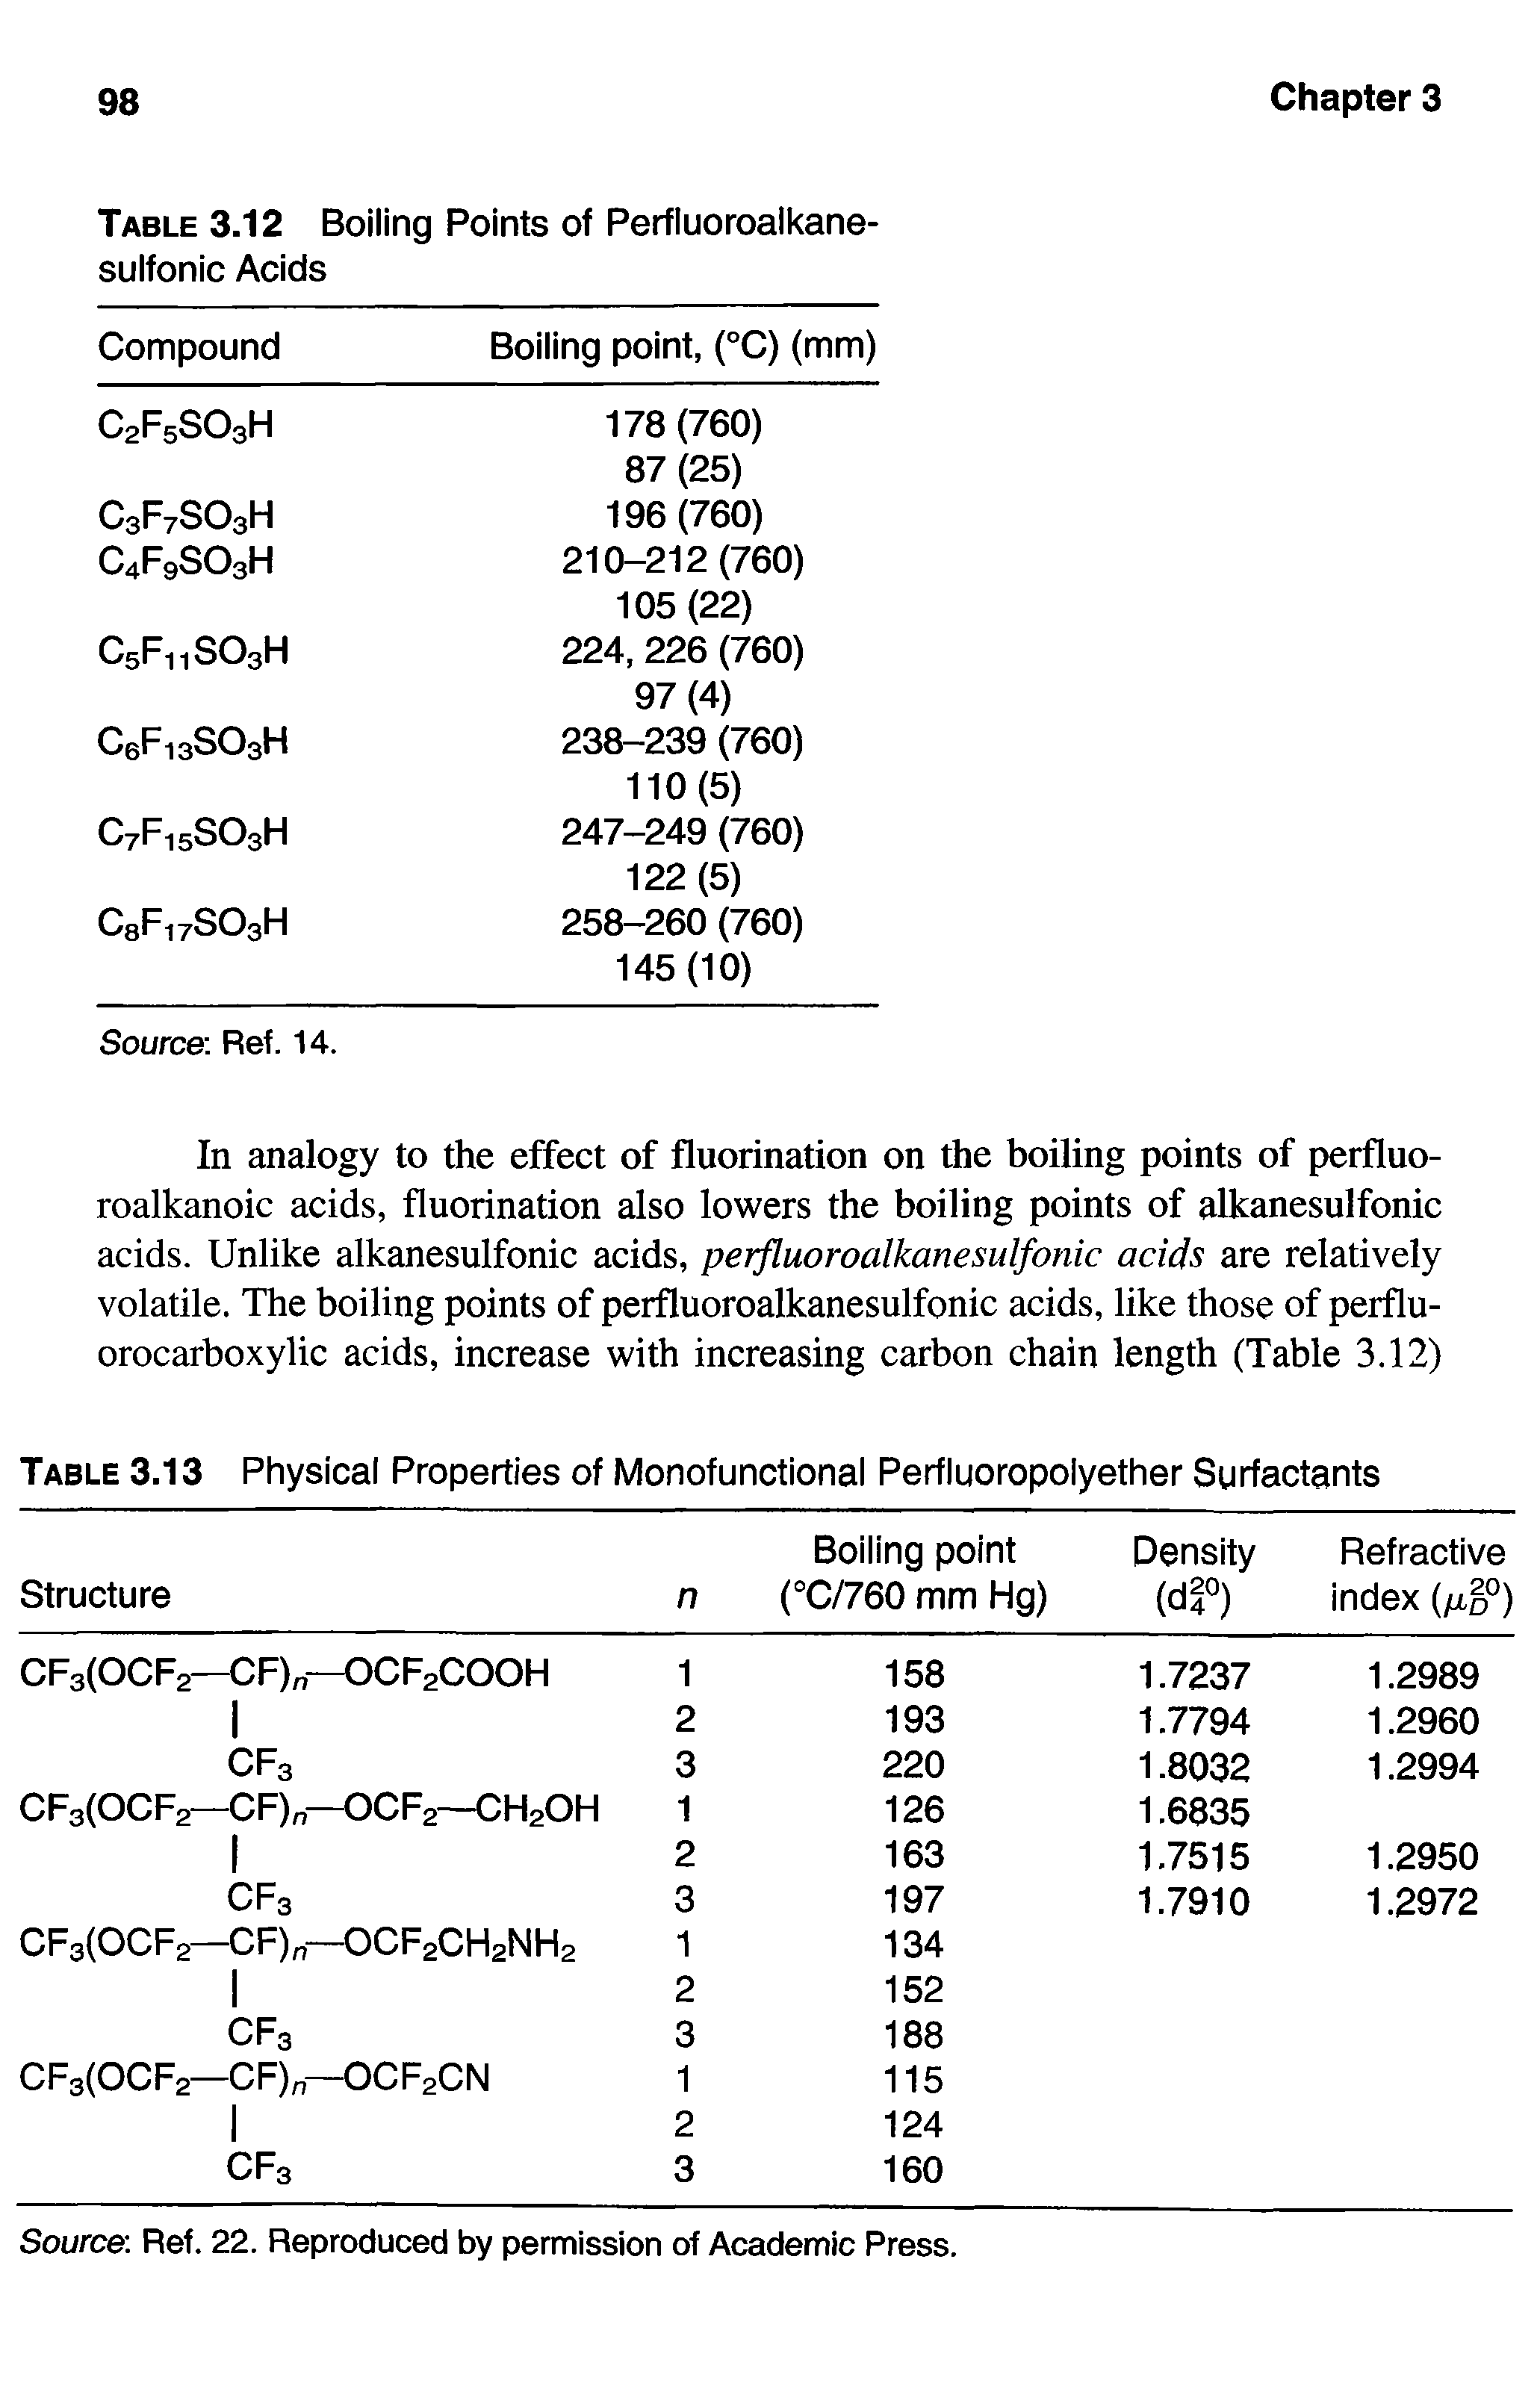 Table 3.12 Boiling Points of Perfluoroalkane-sulfonic Acids...